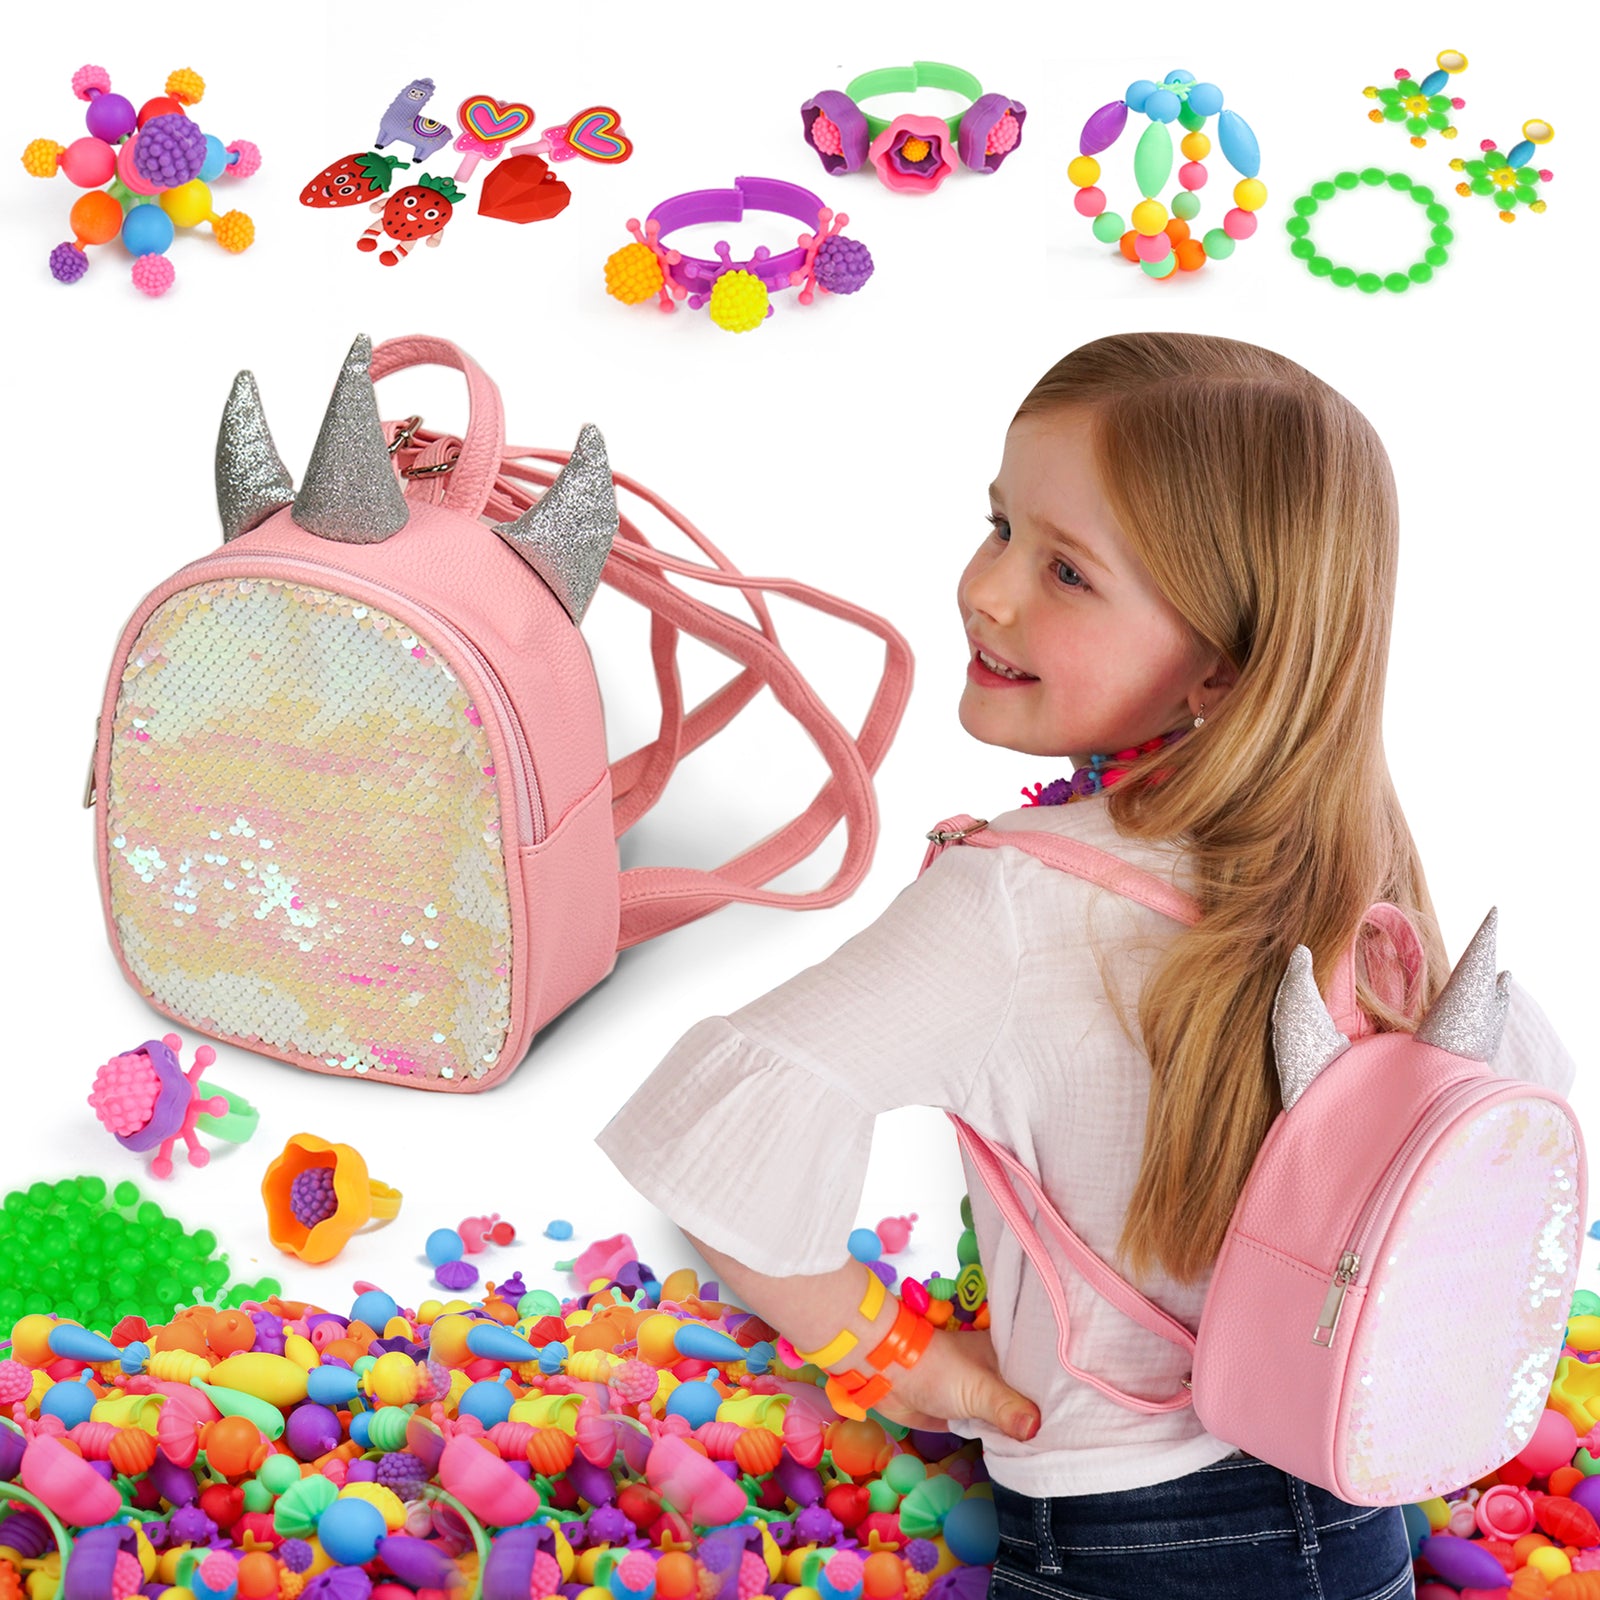 Pop Beads Jewelry making Kit for Kids, Jewelry making Crafts with Unicorn Backpack - Axel Adventures